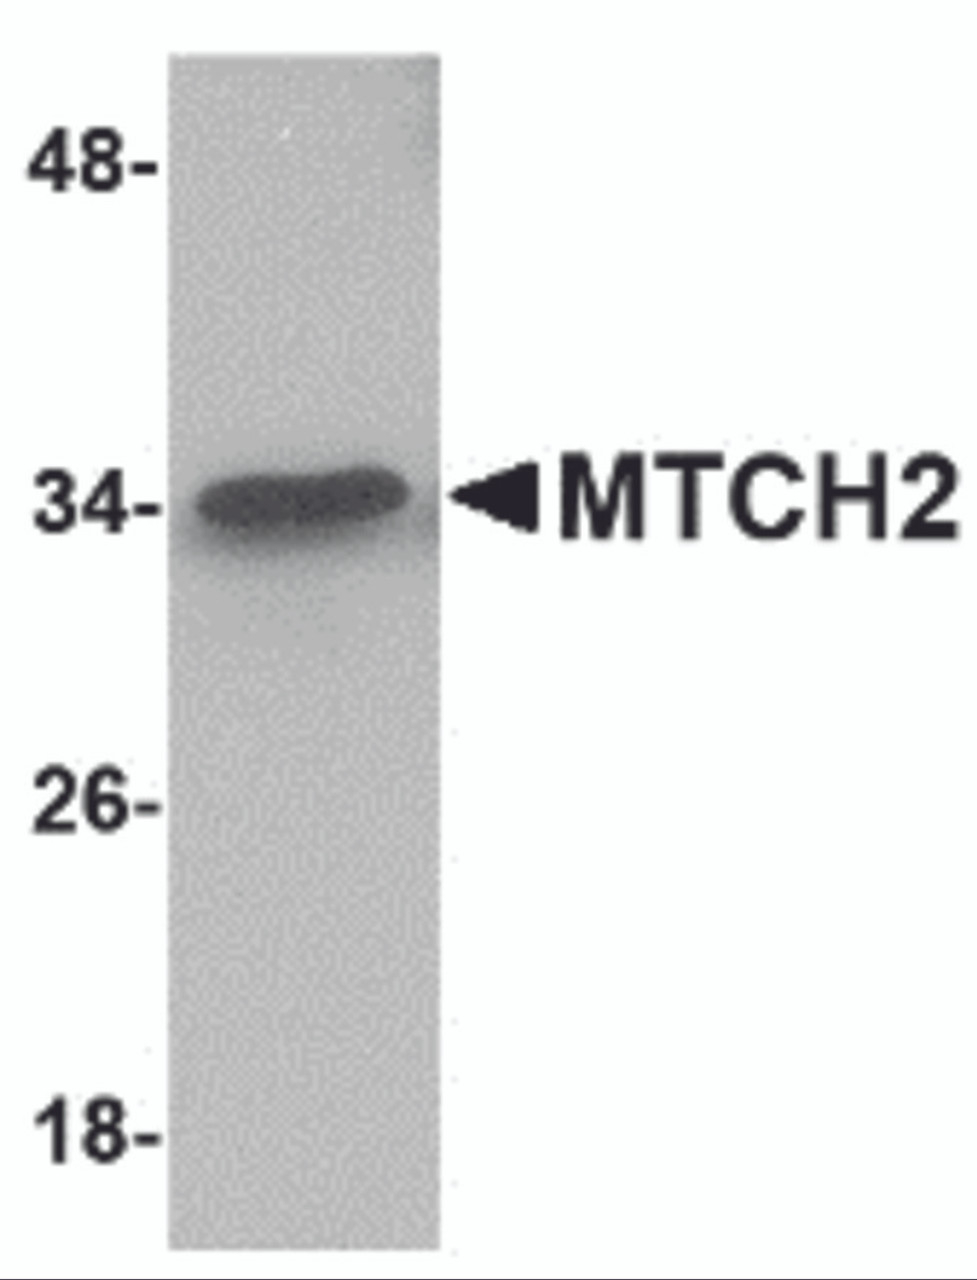 Western blot analysis of MTCH2 in 293 cell lysate with MTCH2 antibody at 1 &#956;g/mL.